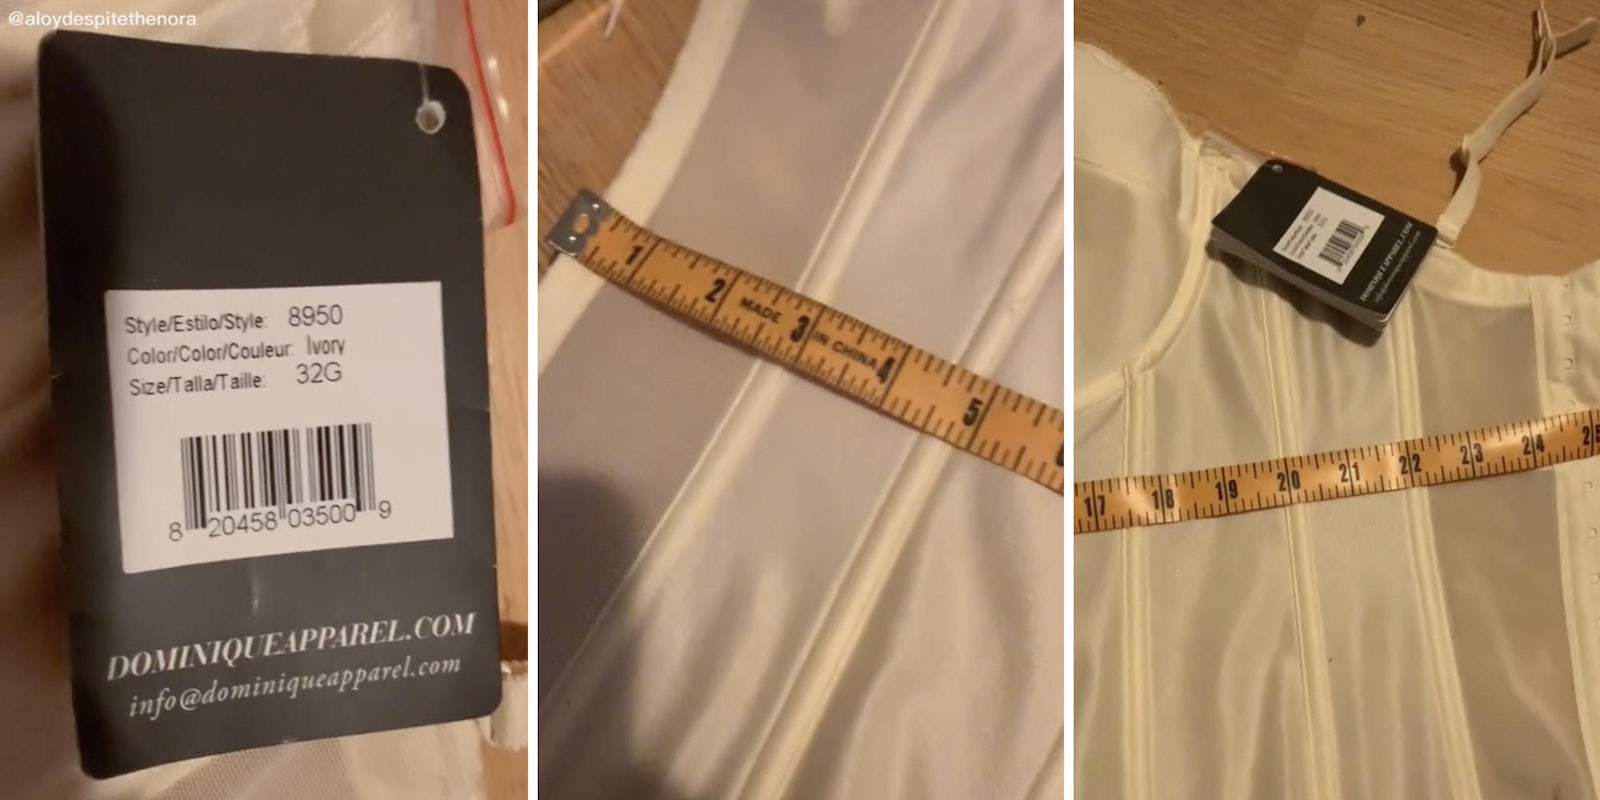 photos of a dress, measuring tape, and dress receipt on the floor